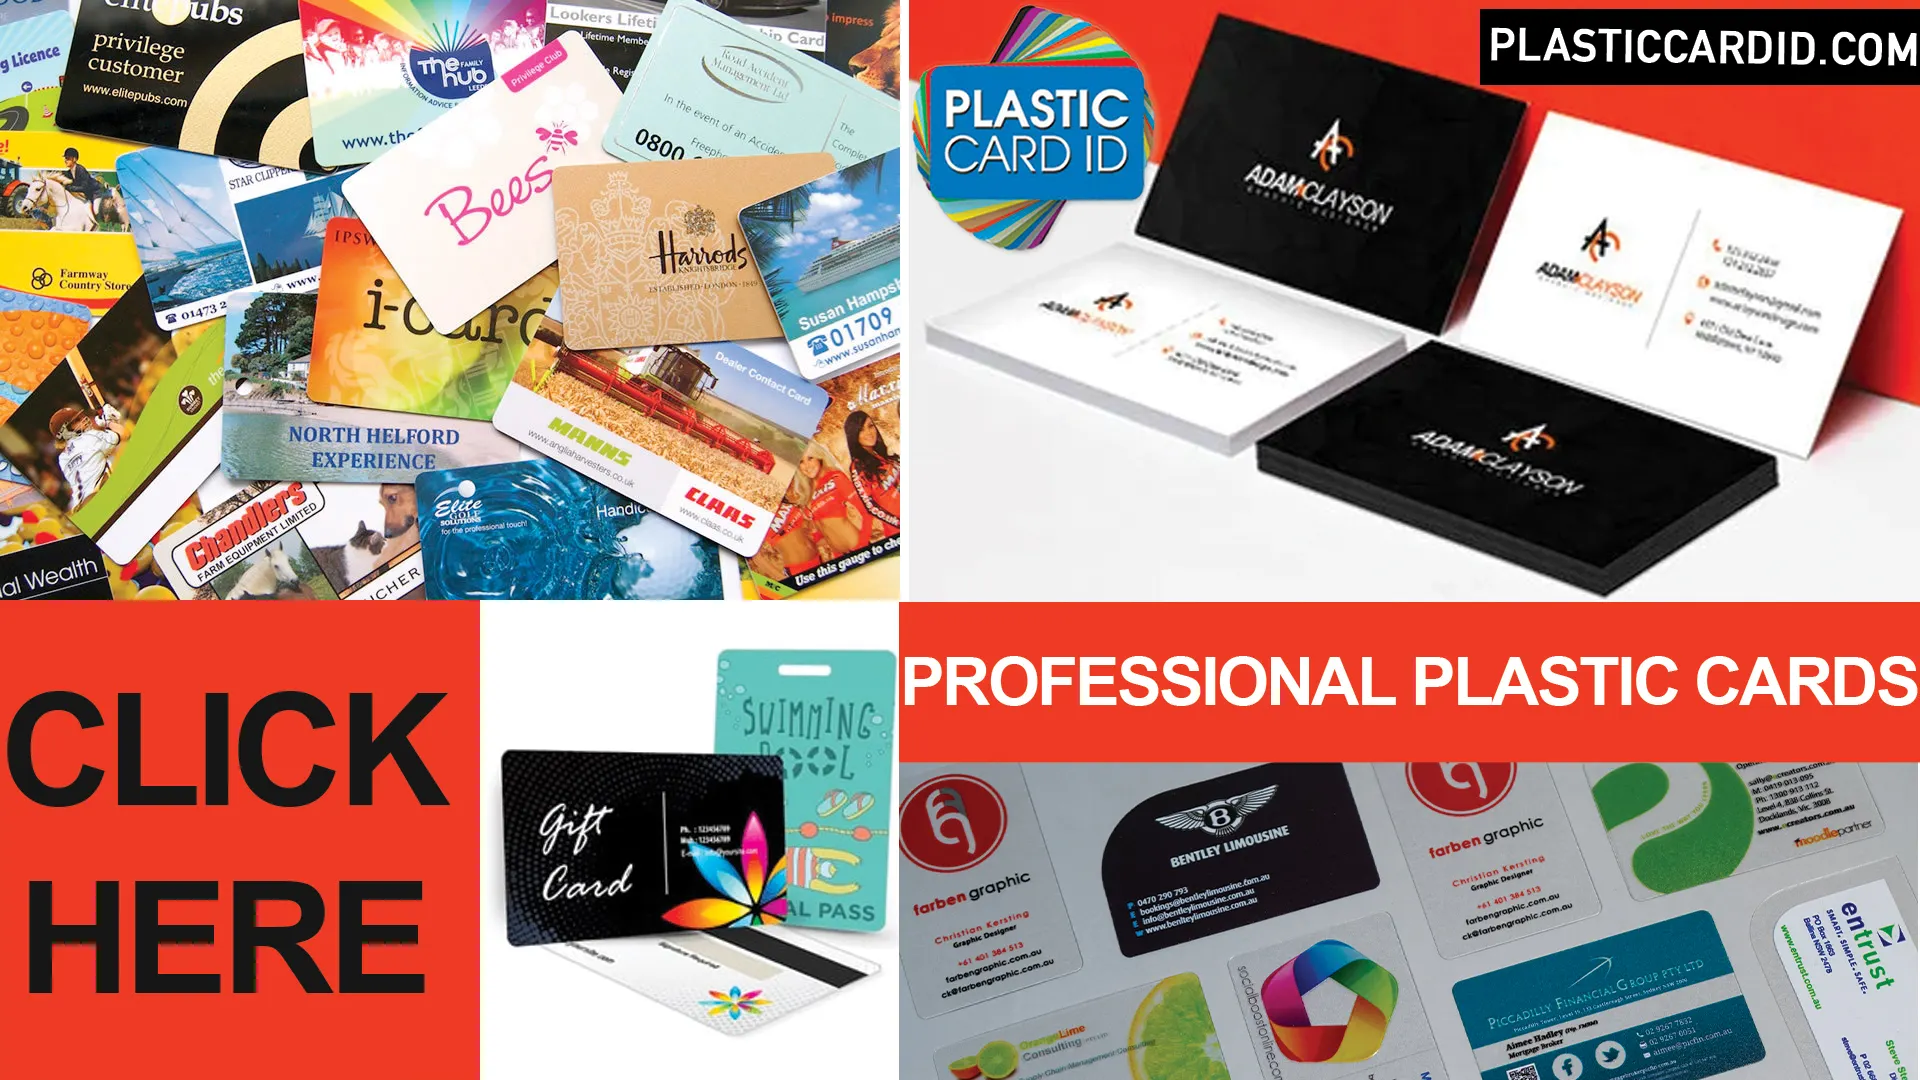 Welcome to the World of Vibrant Litho Printing with Plastic Card ID




